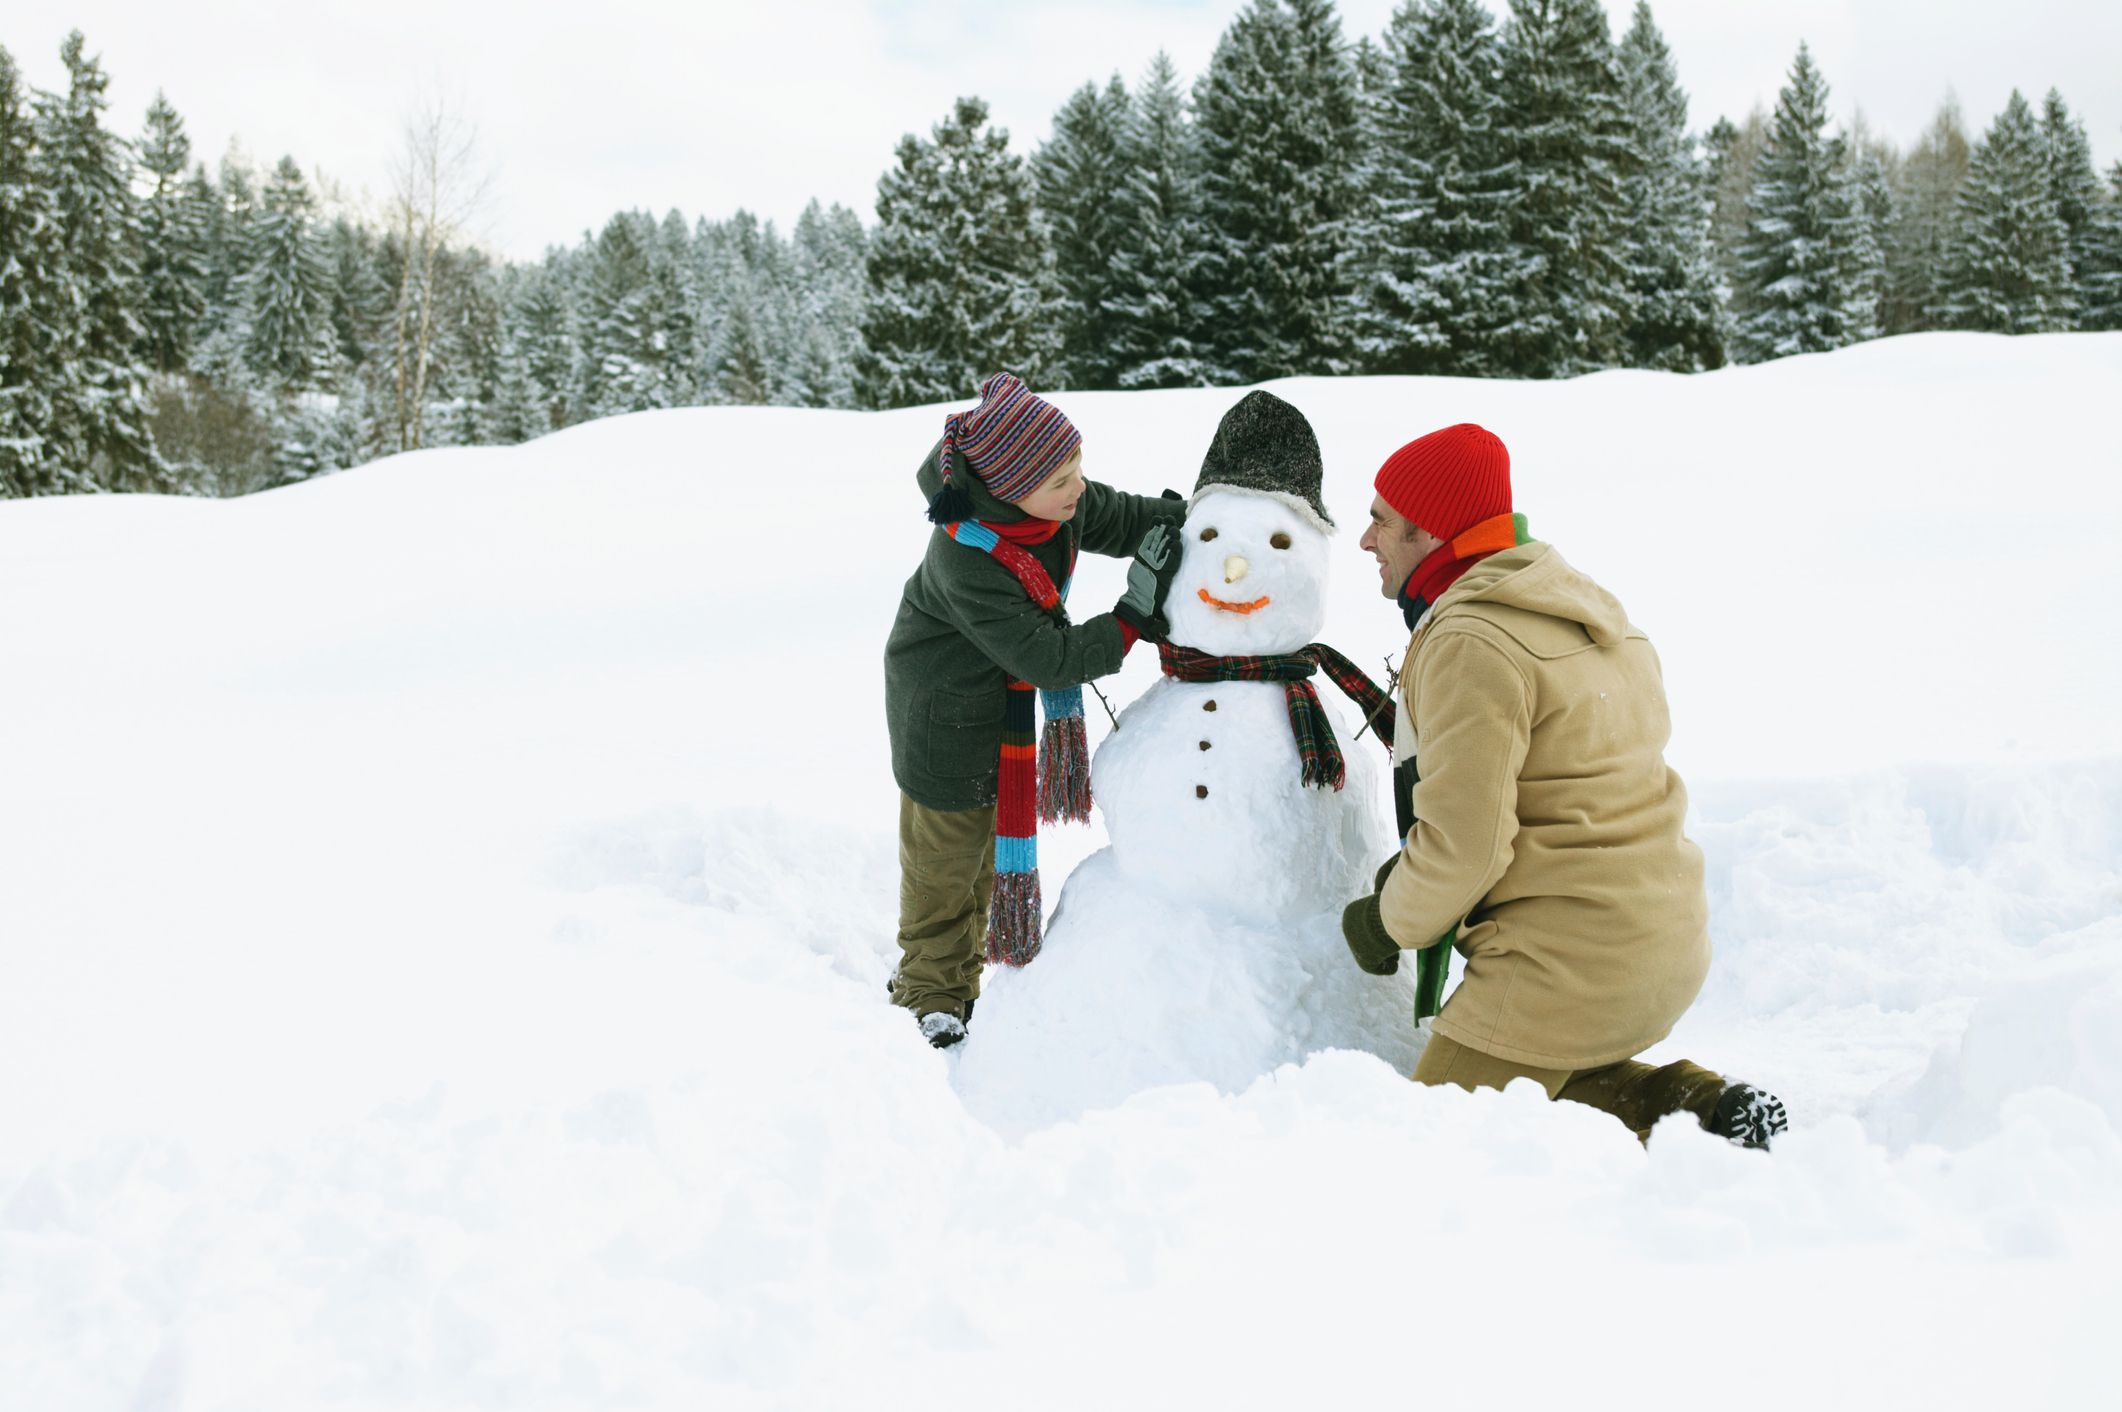 6 Timeless Ways to Have Fun in the Snow - Goodnet